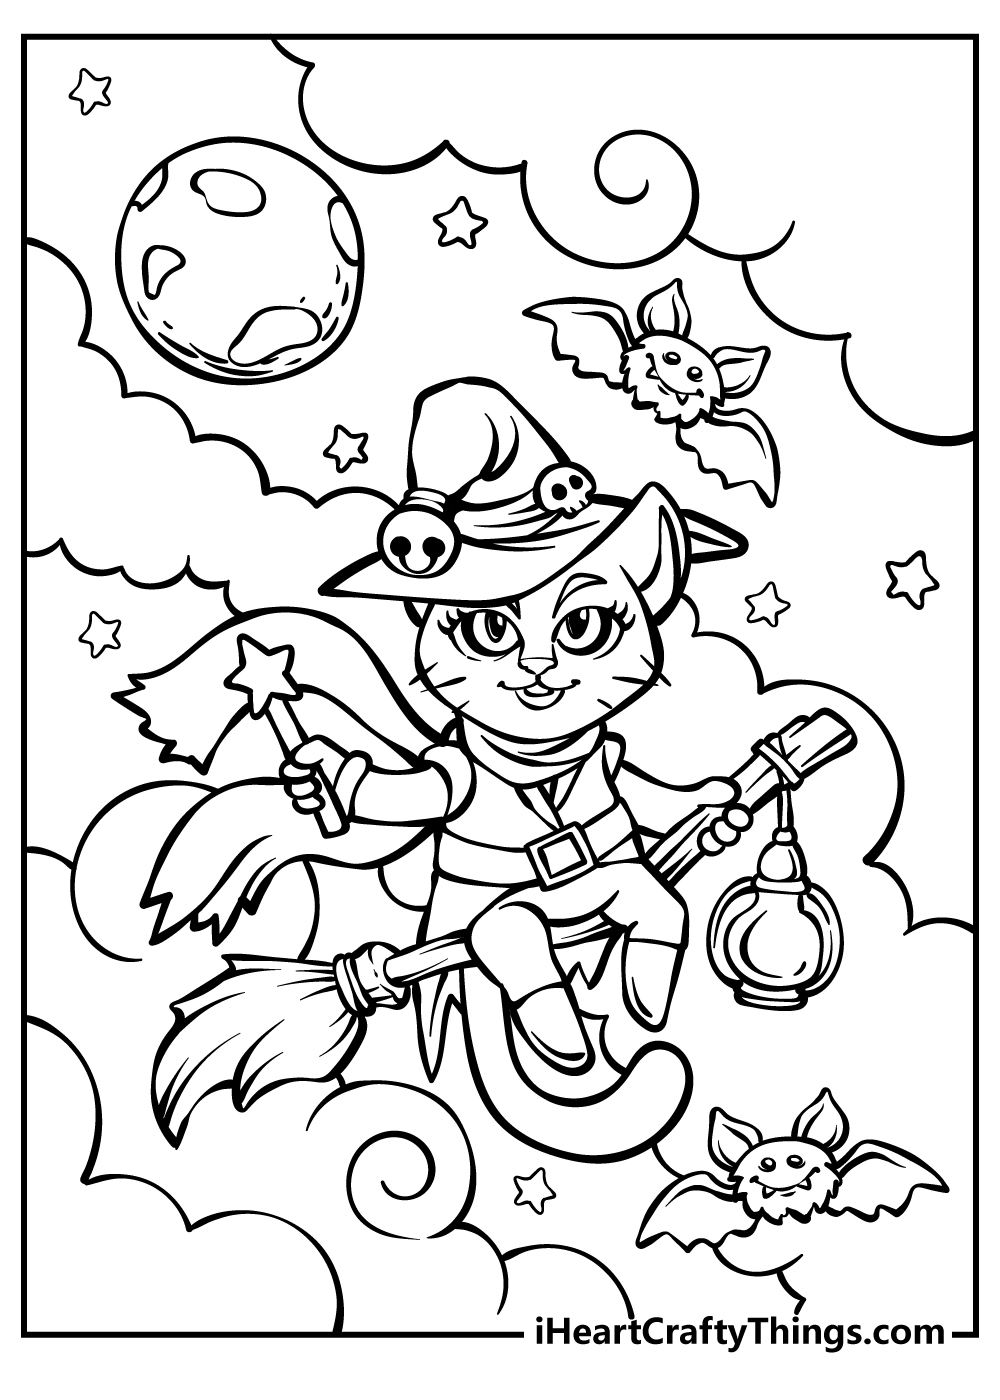 Halloween Coloring Pages for adults free printable